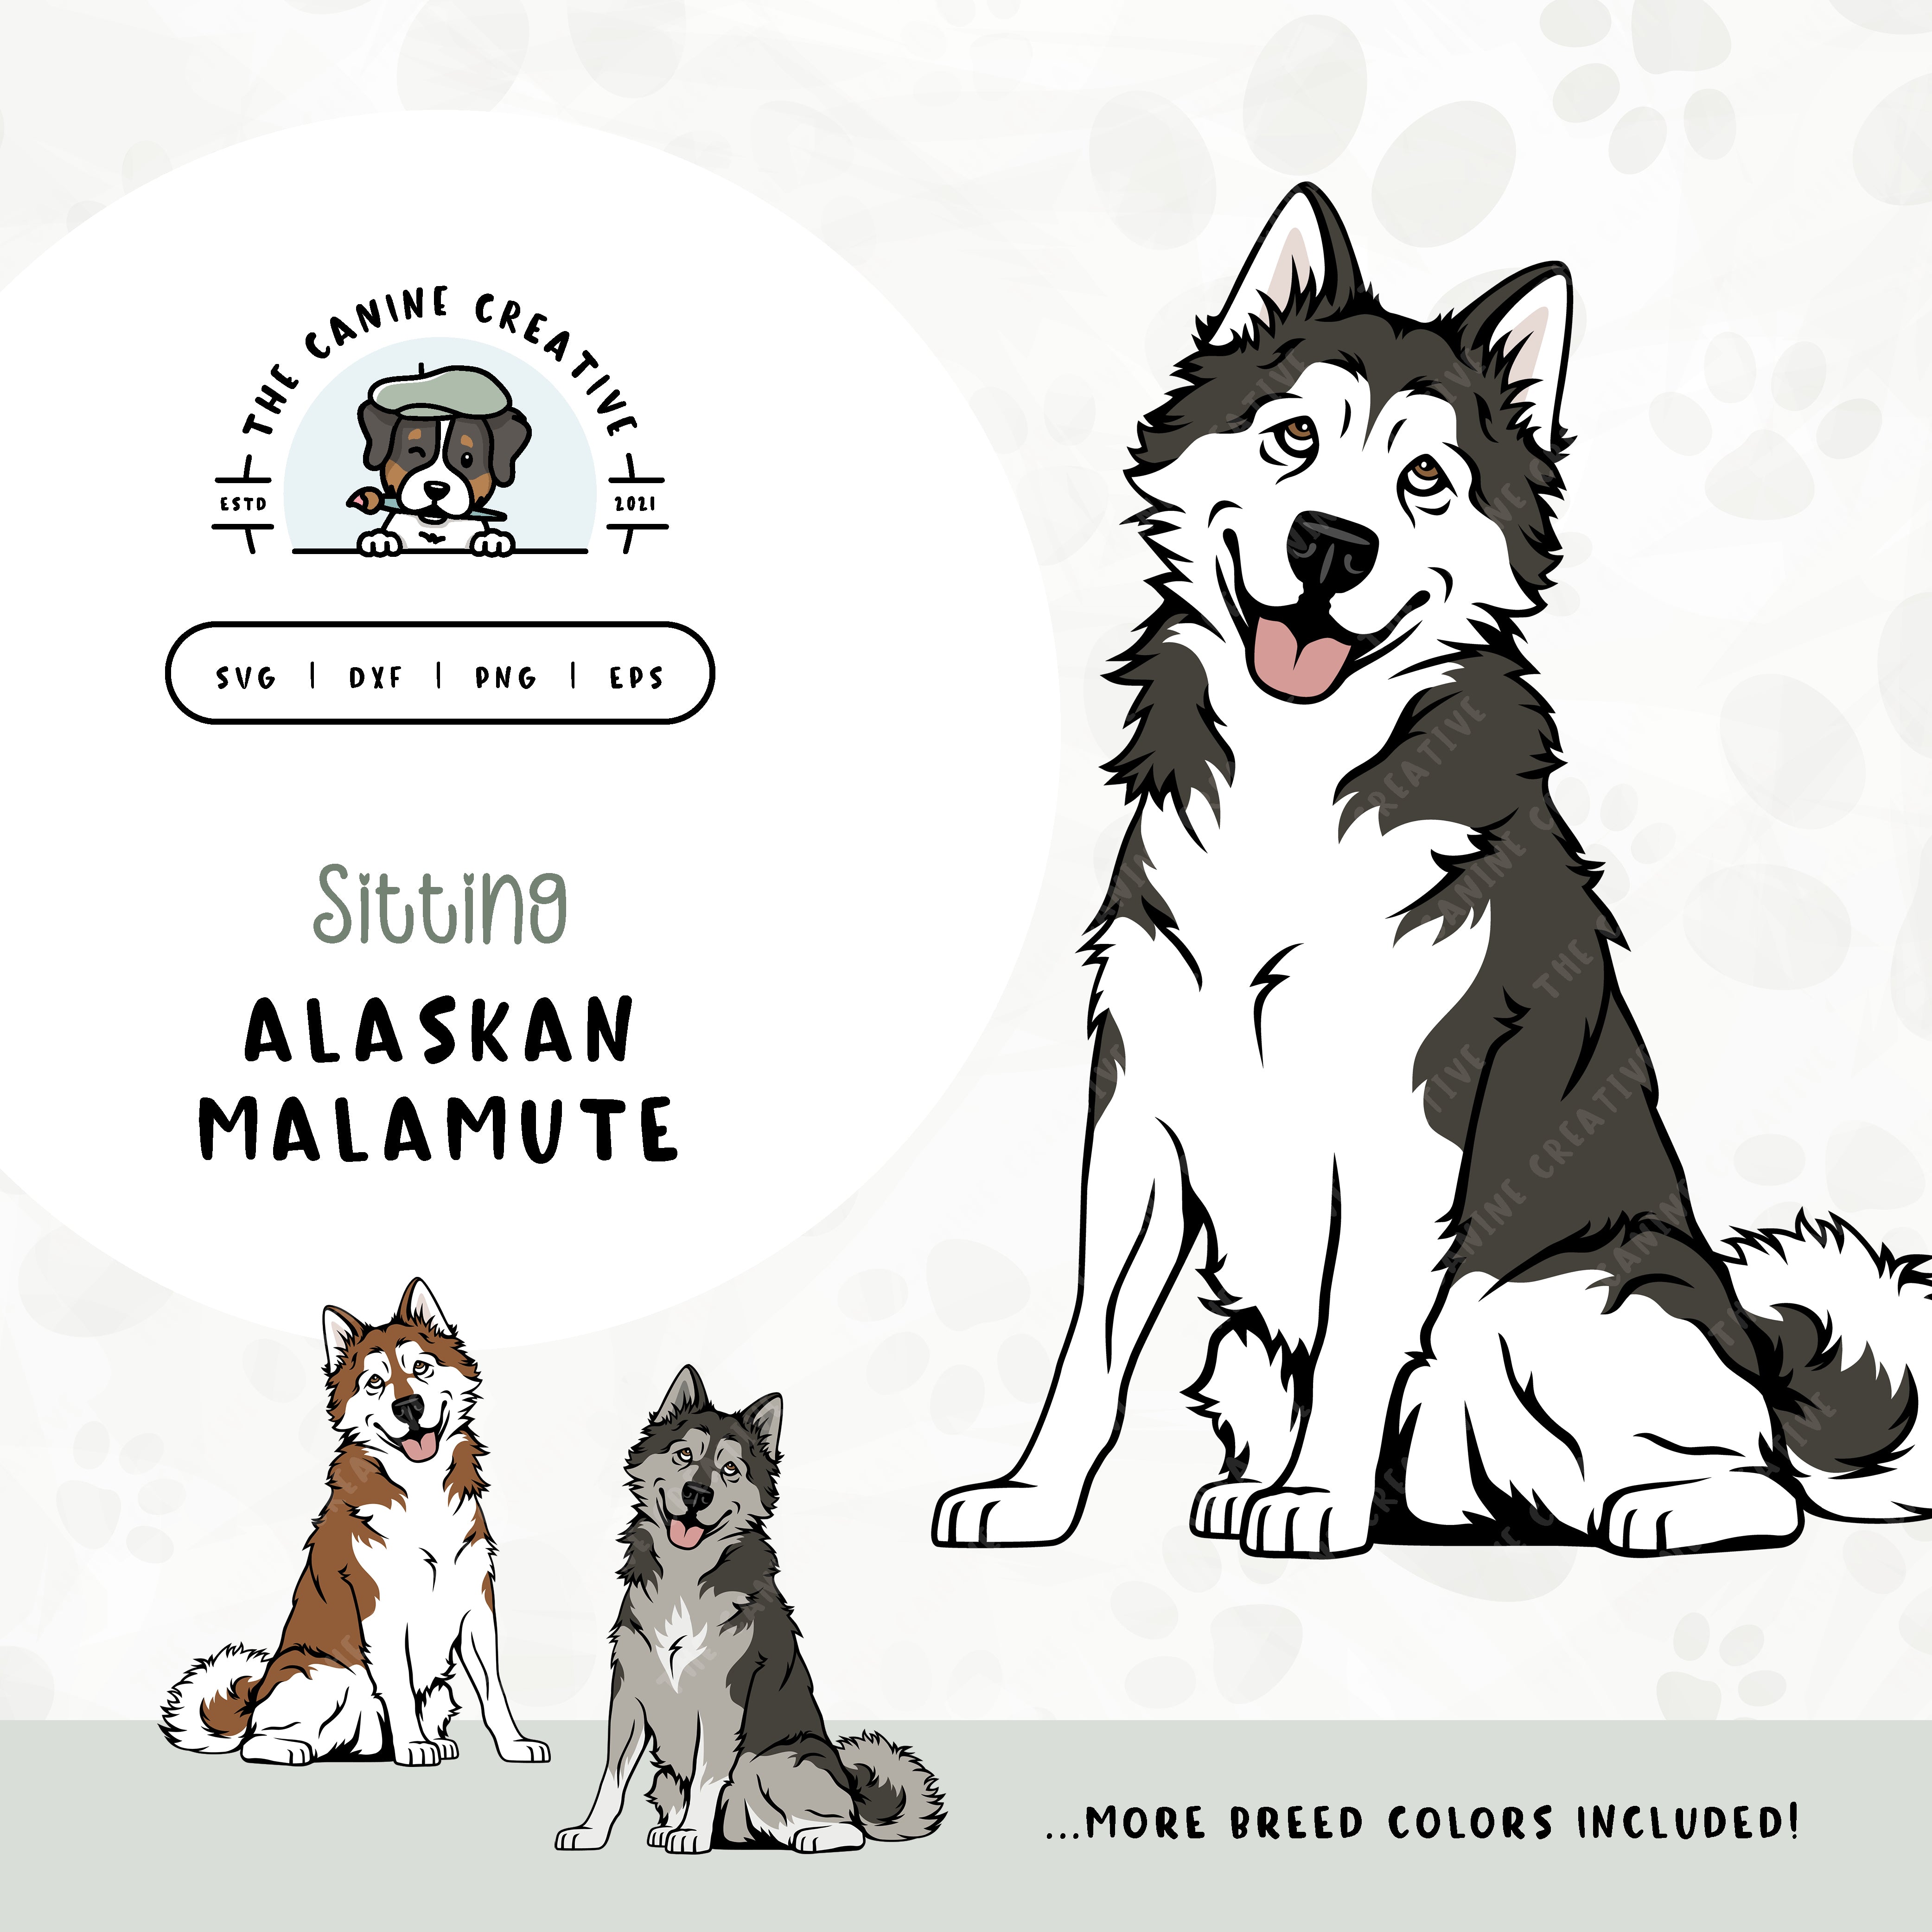 This sitting dog design features an Alaskan Malamute. File formats include: SVG, DXF, PNG, and EPS.